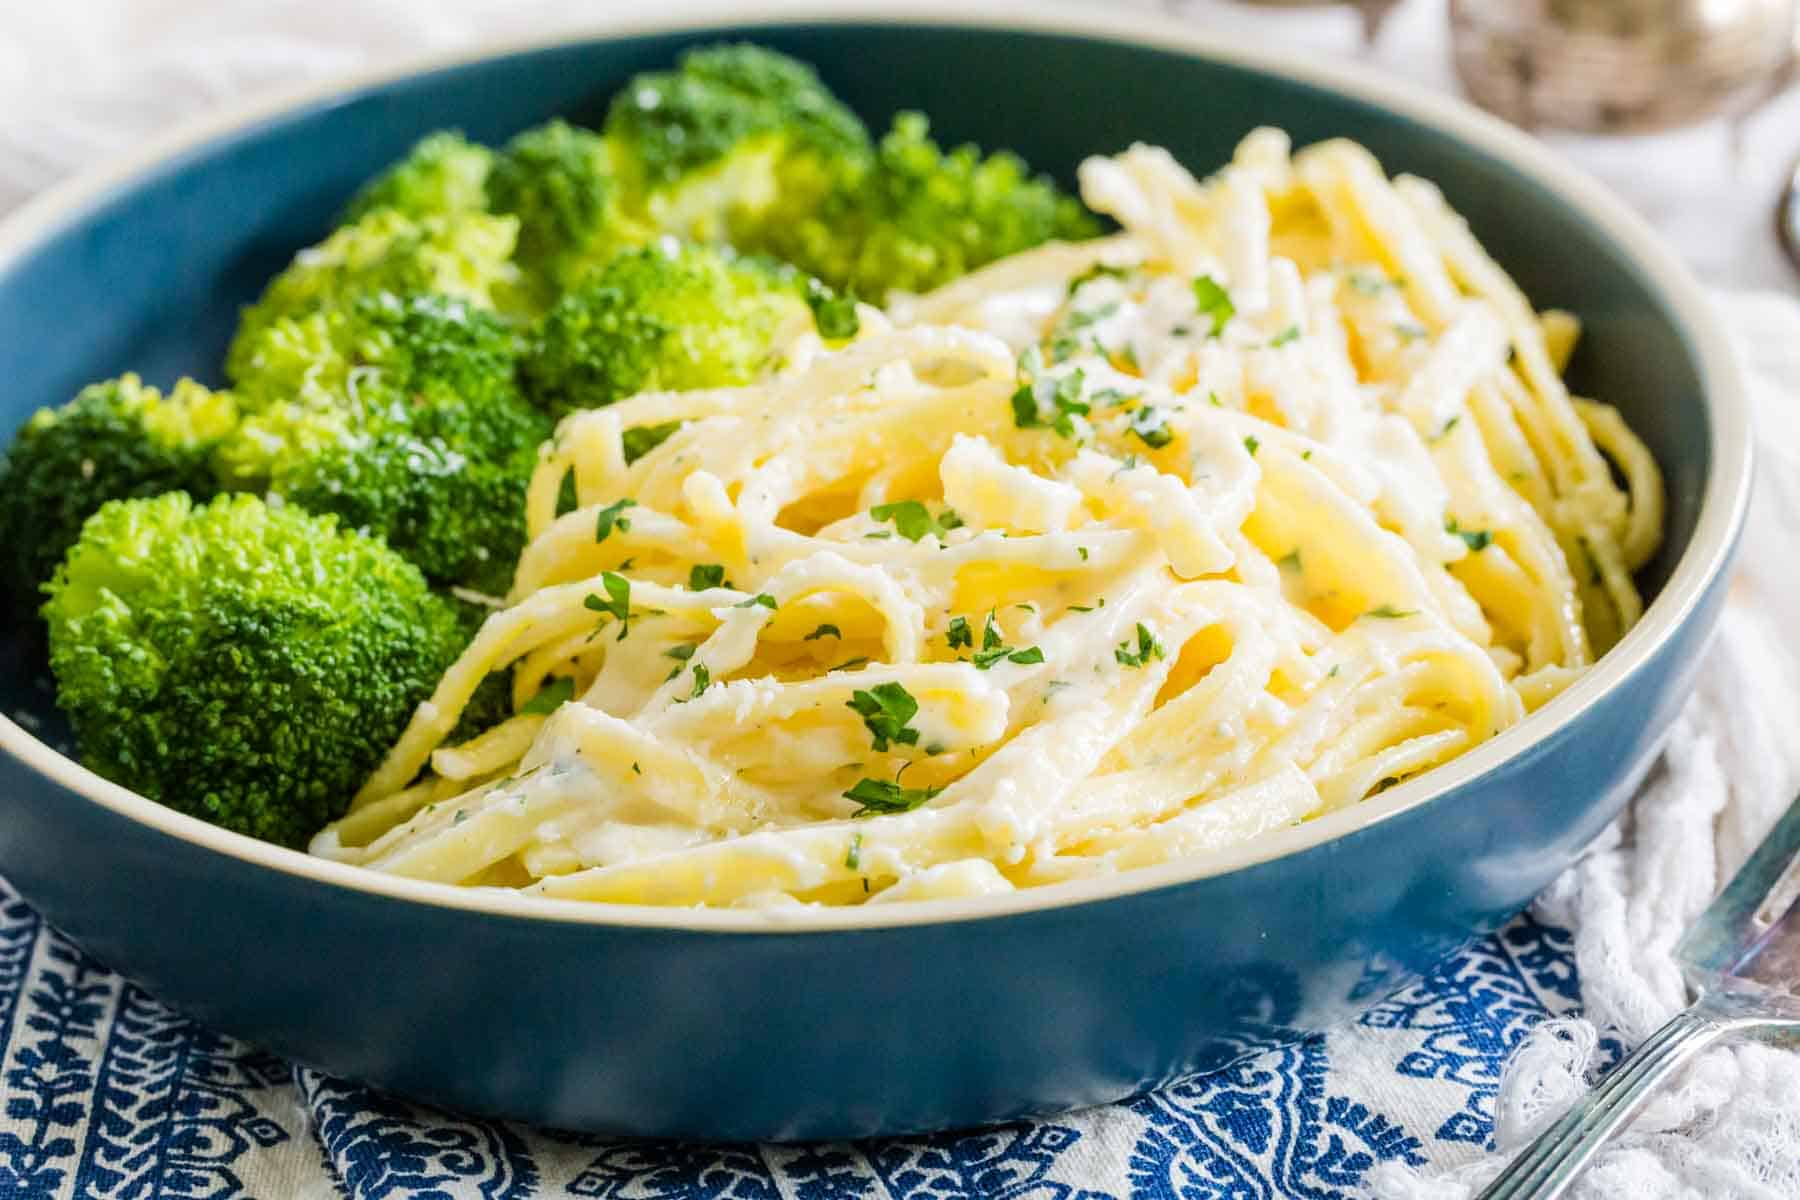 Gluten-Free Fettuccine Alfredo is shown in a bowl topped with parsley with broccoli alongside.